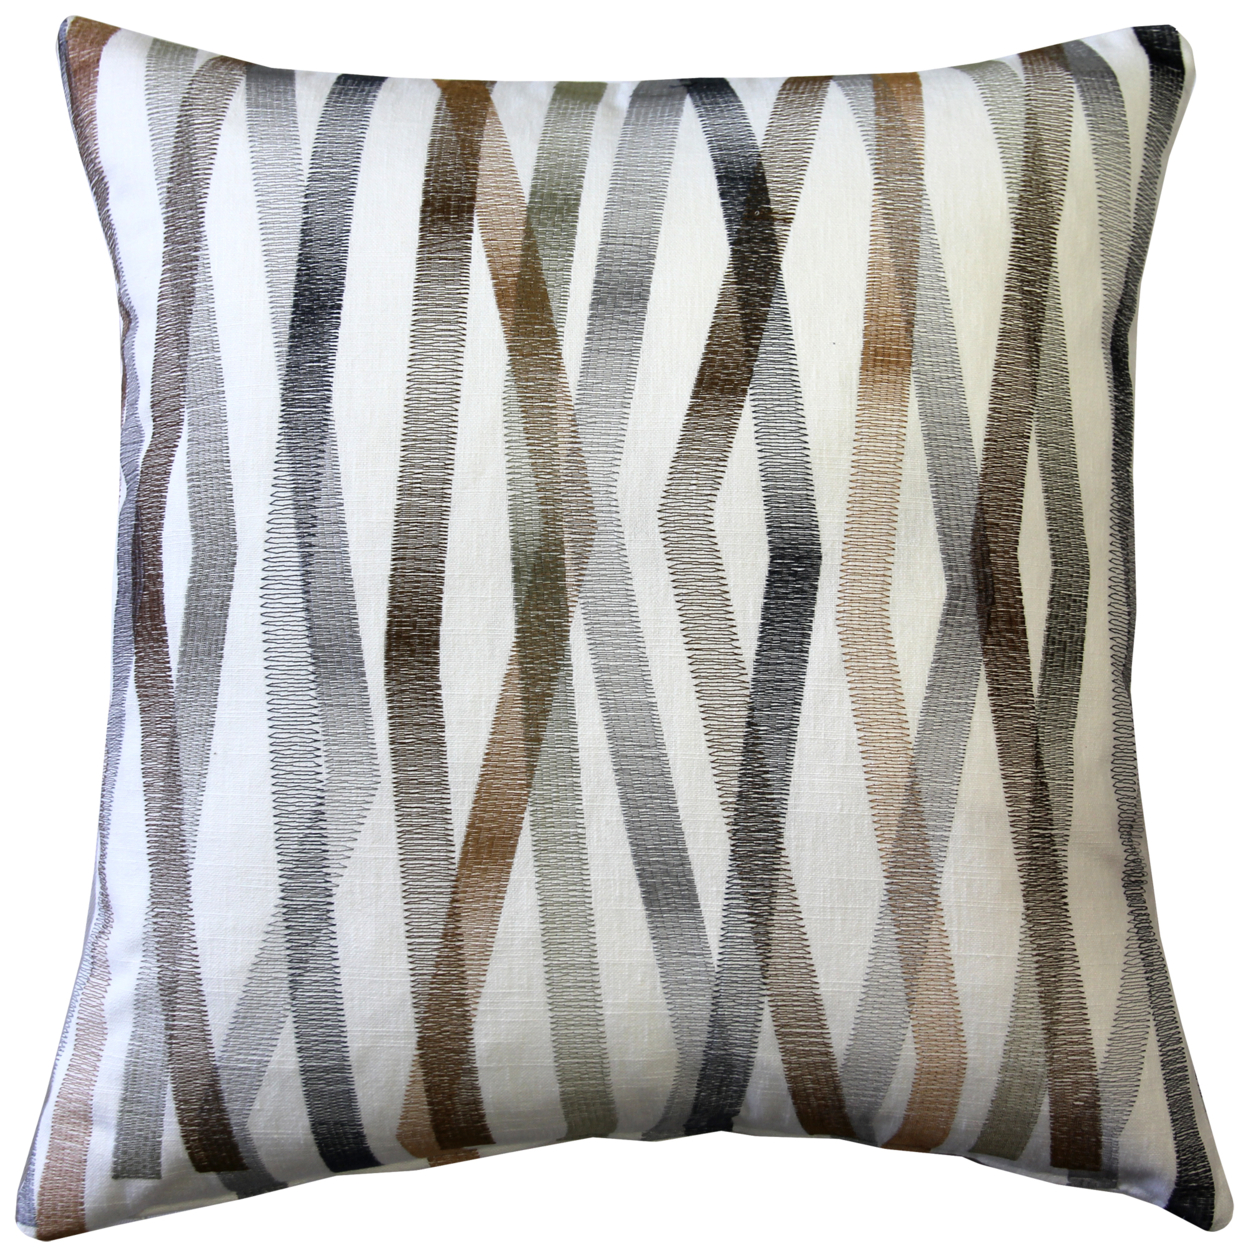 Wandering Lines Forest Grove Throw Pillow 19x19 Inches Square, Complete Pillow With Polyfill Pillow Insert